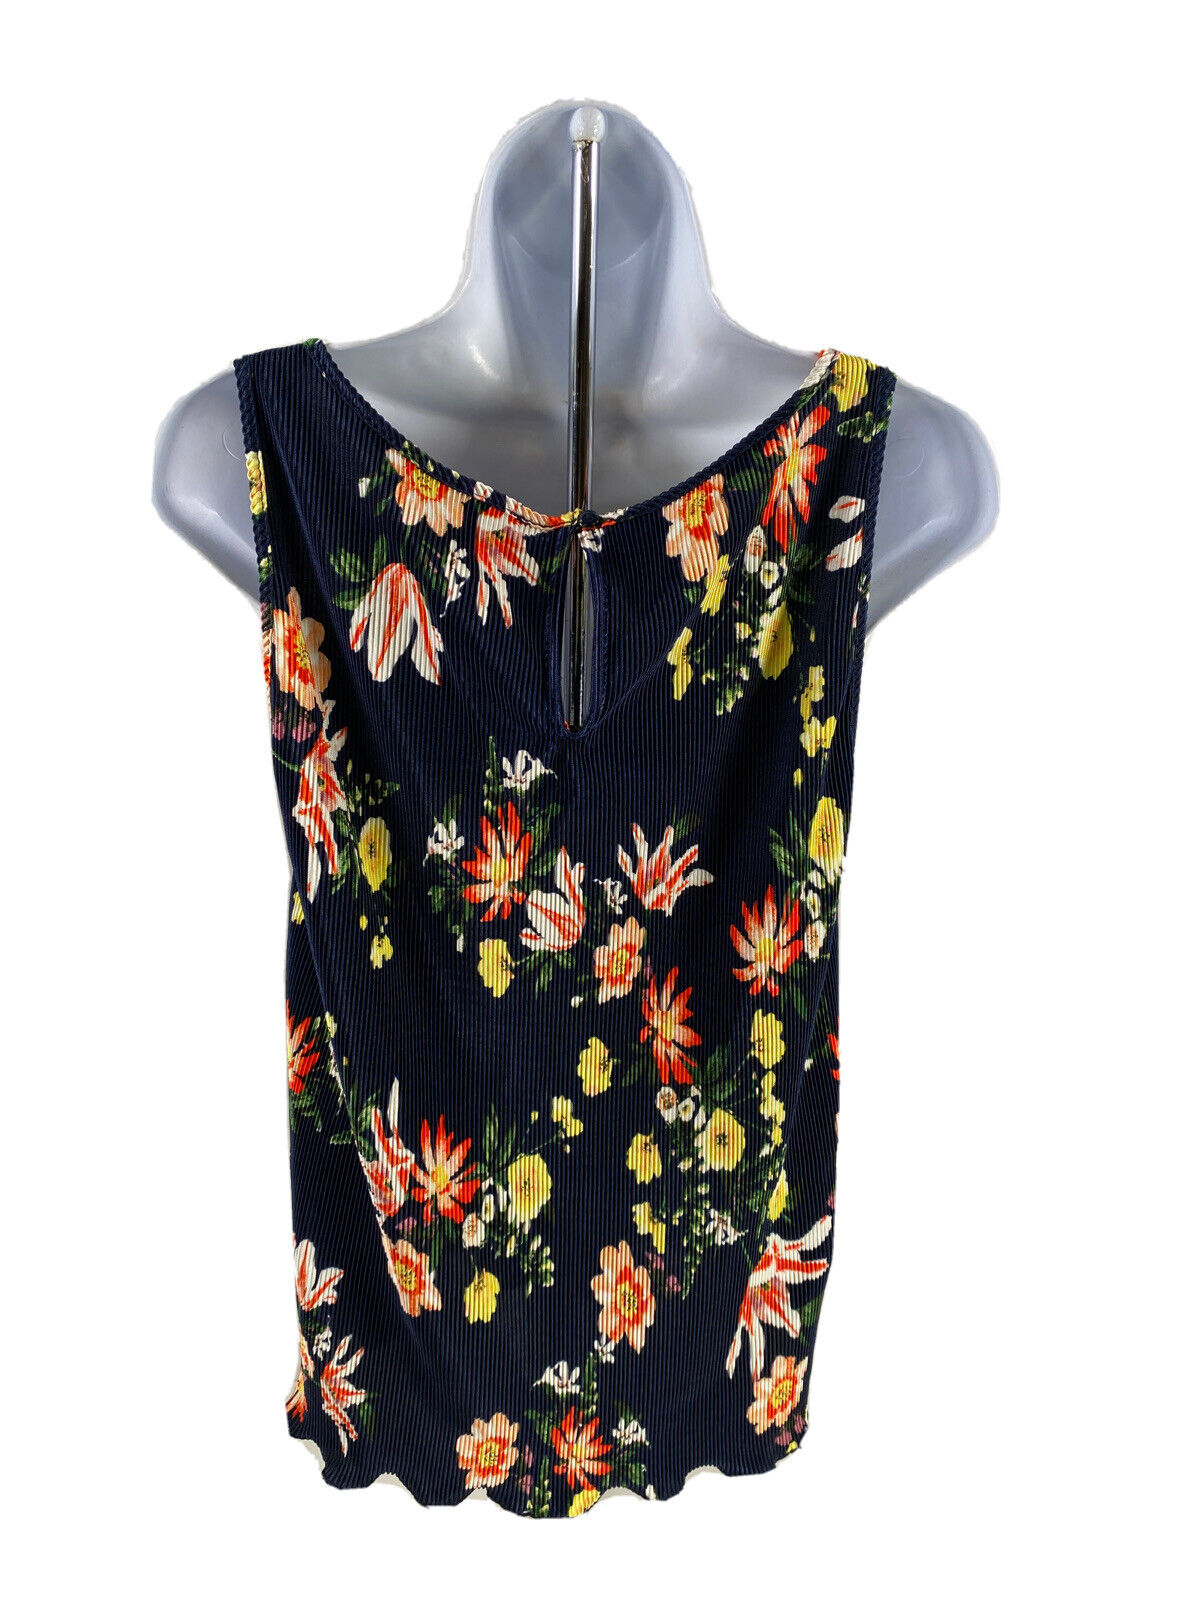 NEW Ann Taylor Women's Navy Blue Floral Sleeveless Pleated Top - S